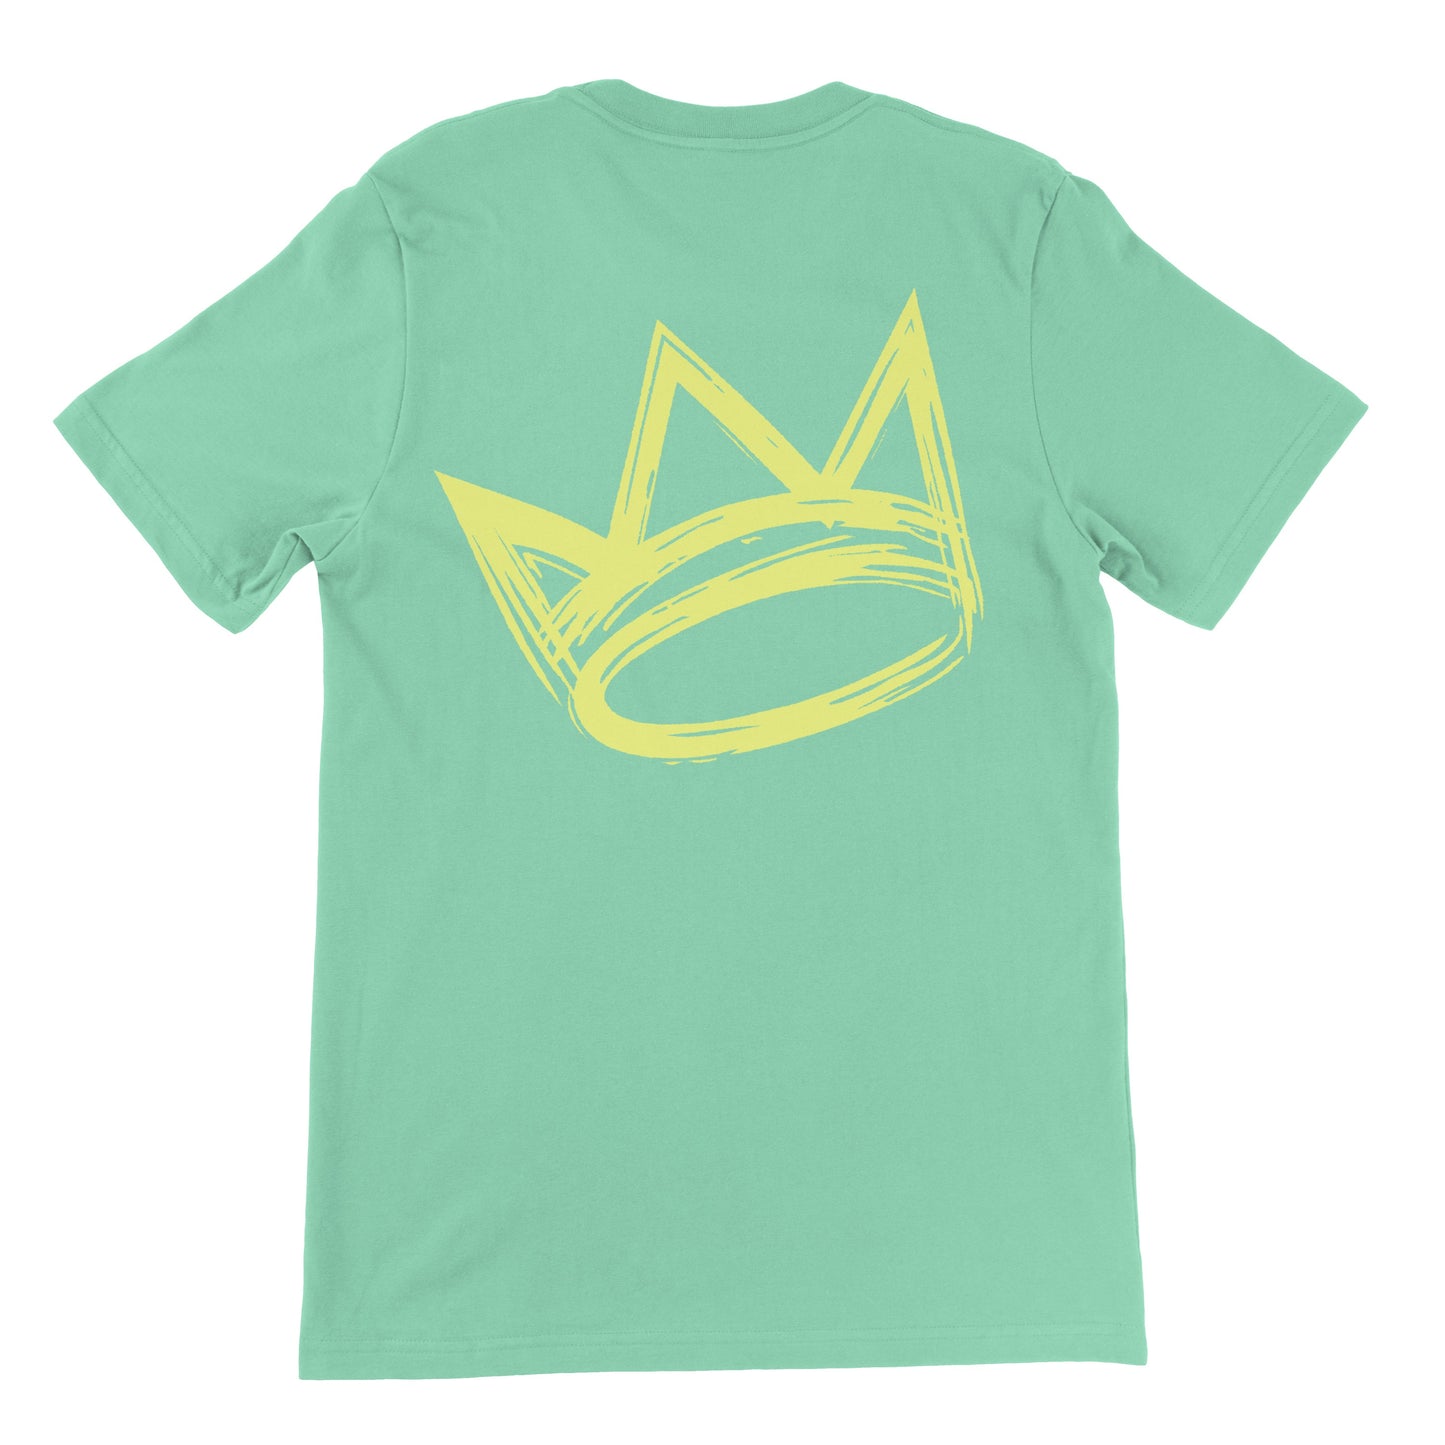 King Crown Collection (Mint Short Sleeve T-Shirt Gold Crown)